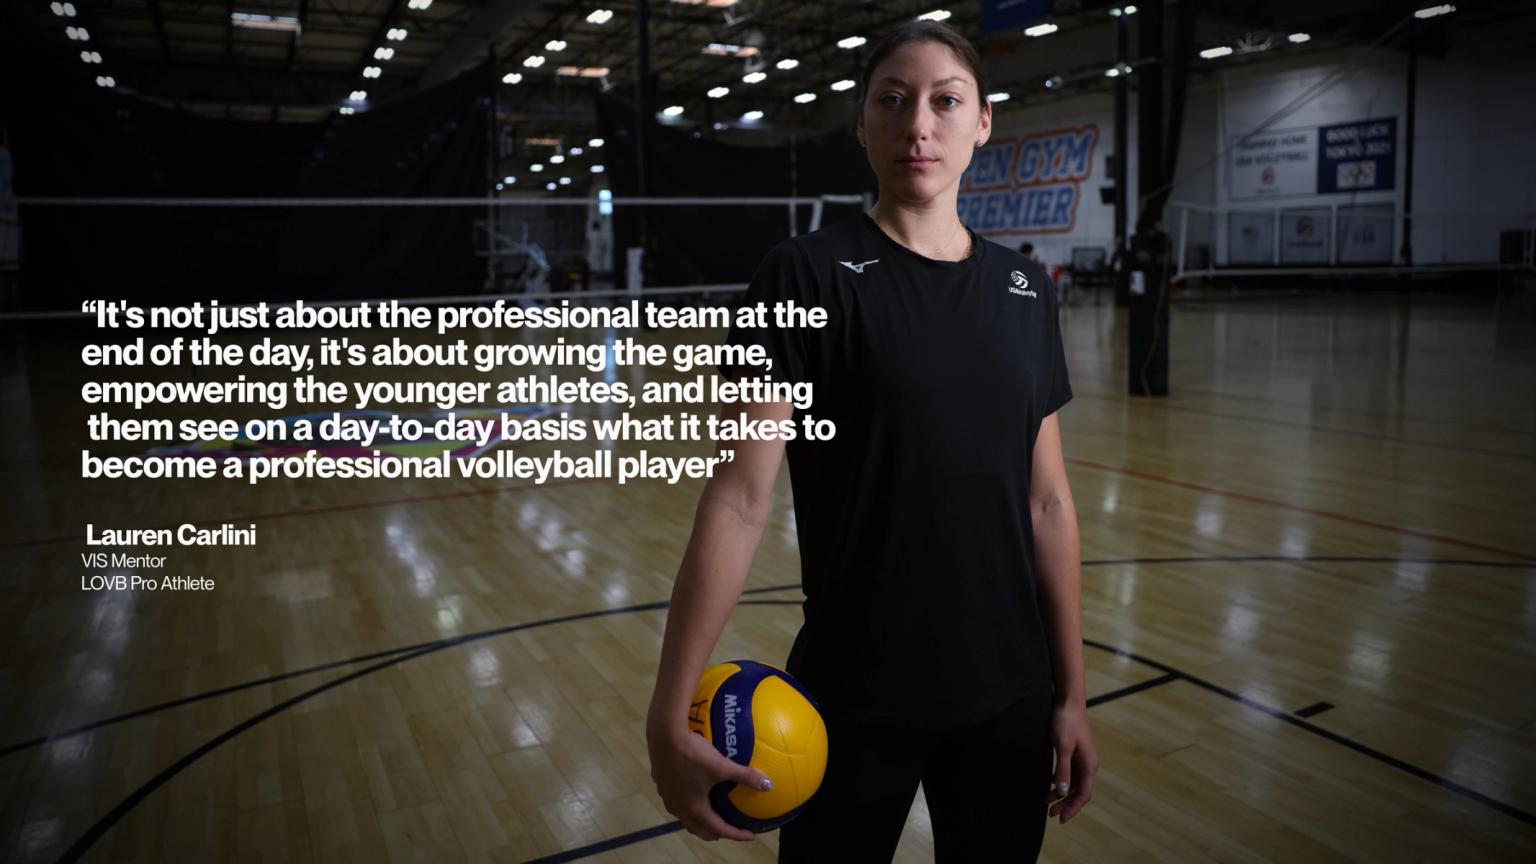  League One Volleyball: A Competition for Change